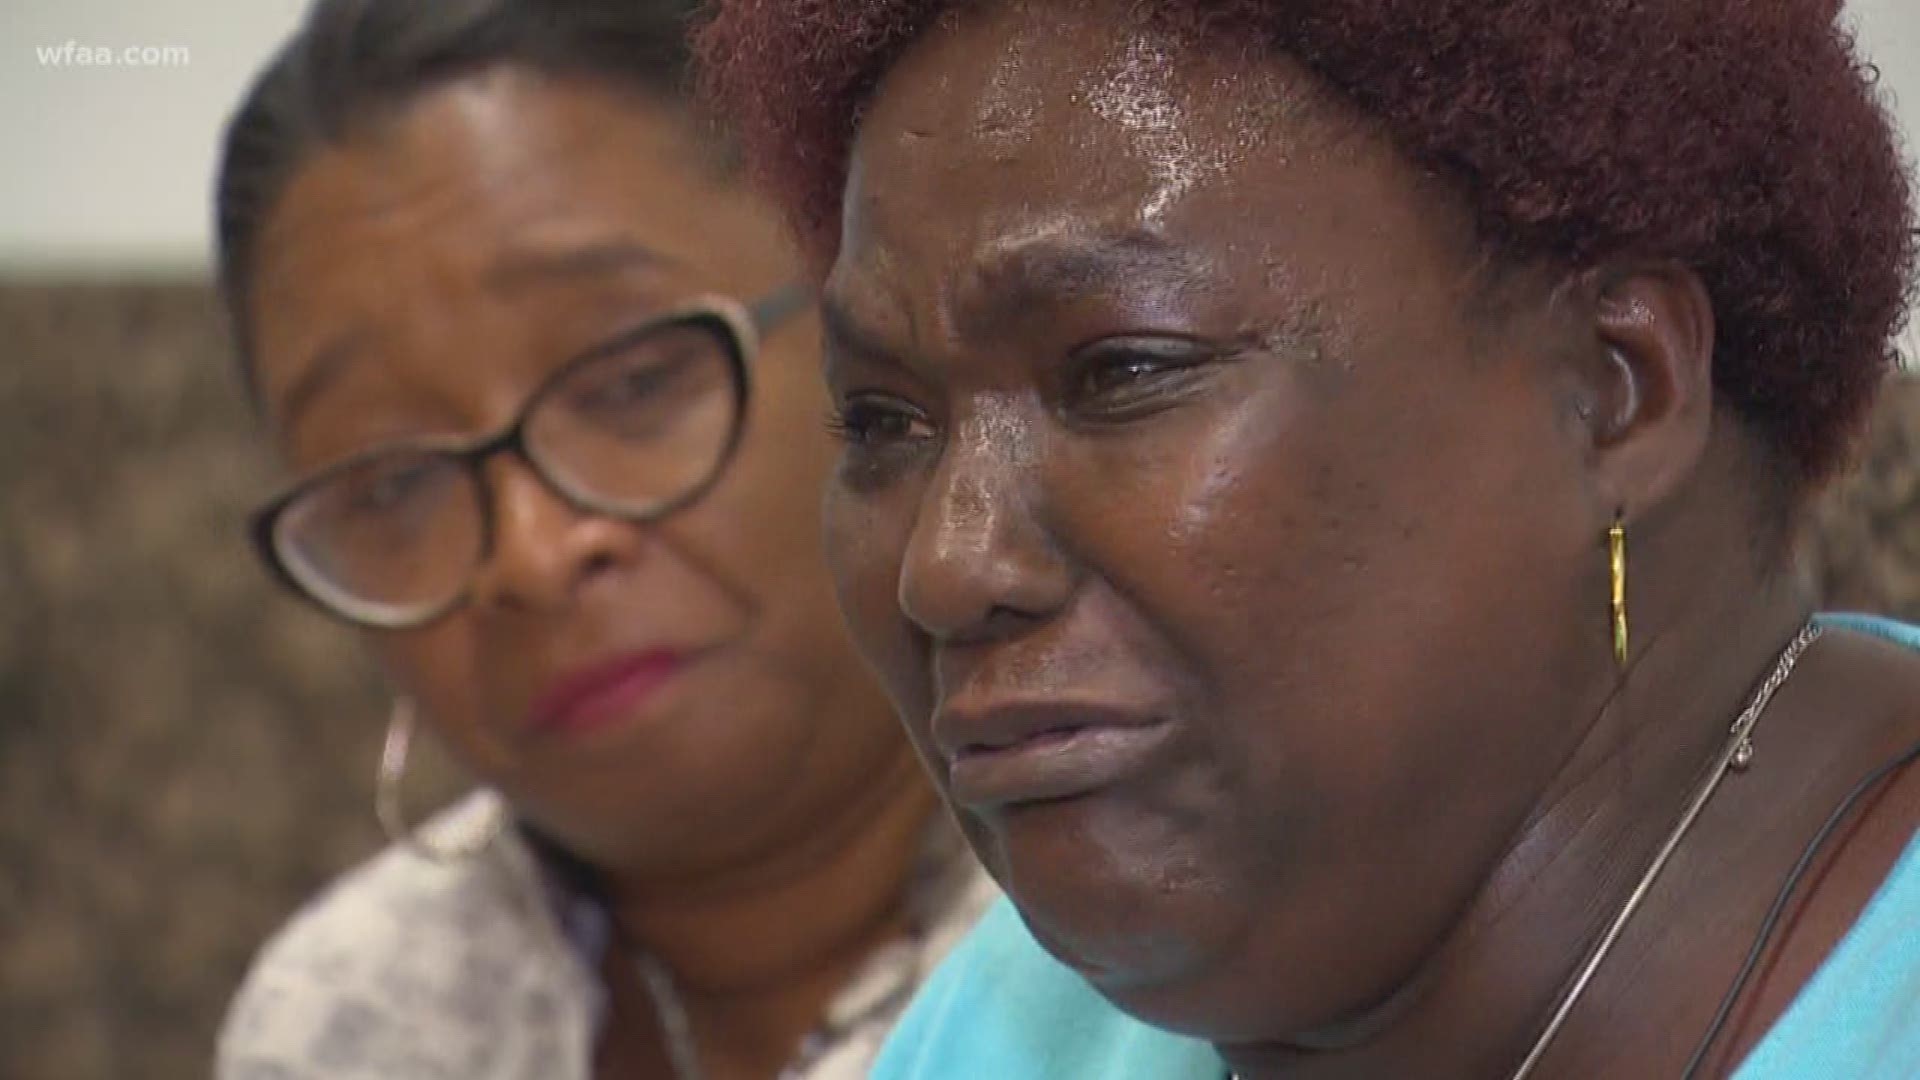 Several mothers whose sons killed by police officers surrounded Botham Jean's family in court. They share a pain through their son's stories.